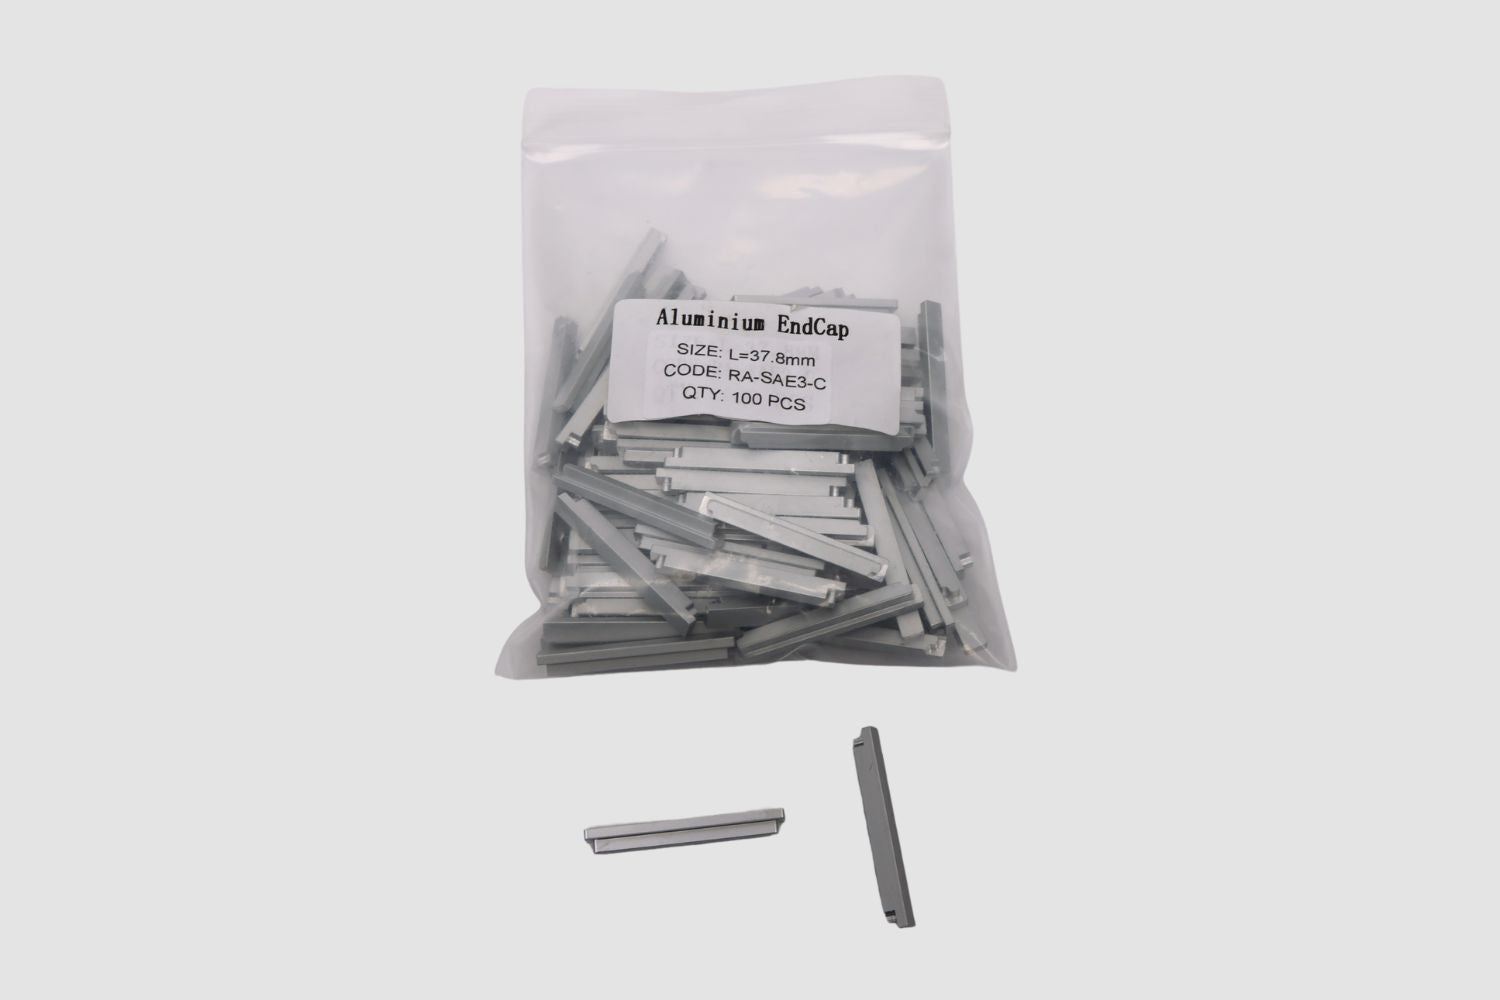 RA-SAE3-C 38mm Extrusion End Caps Bag of 100